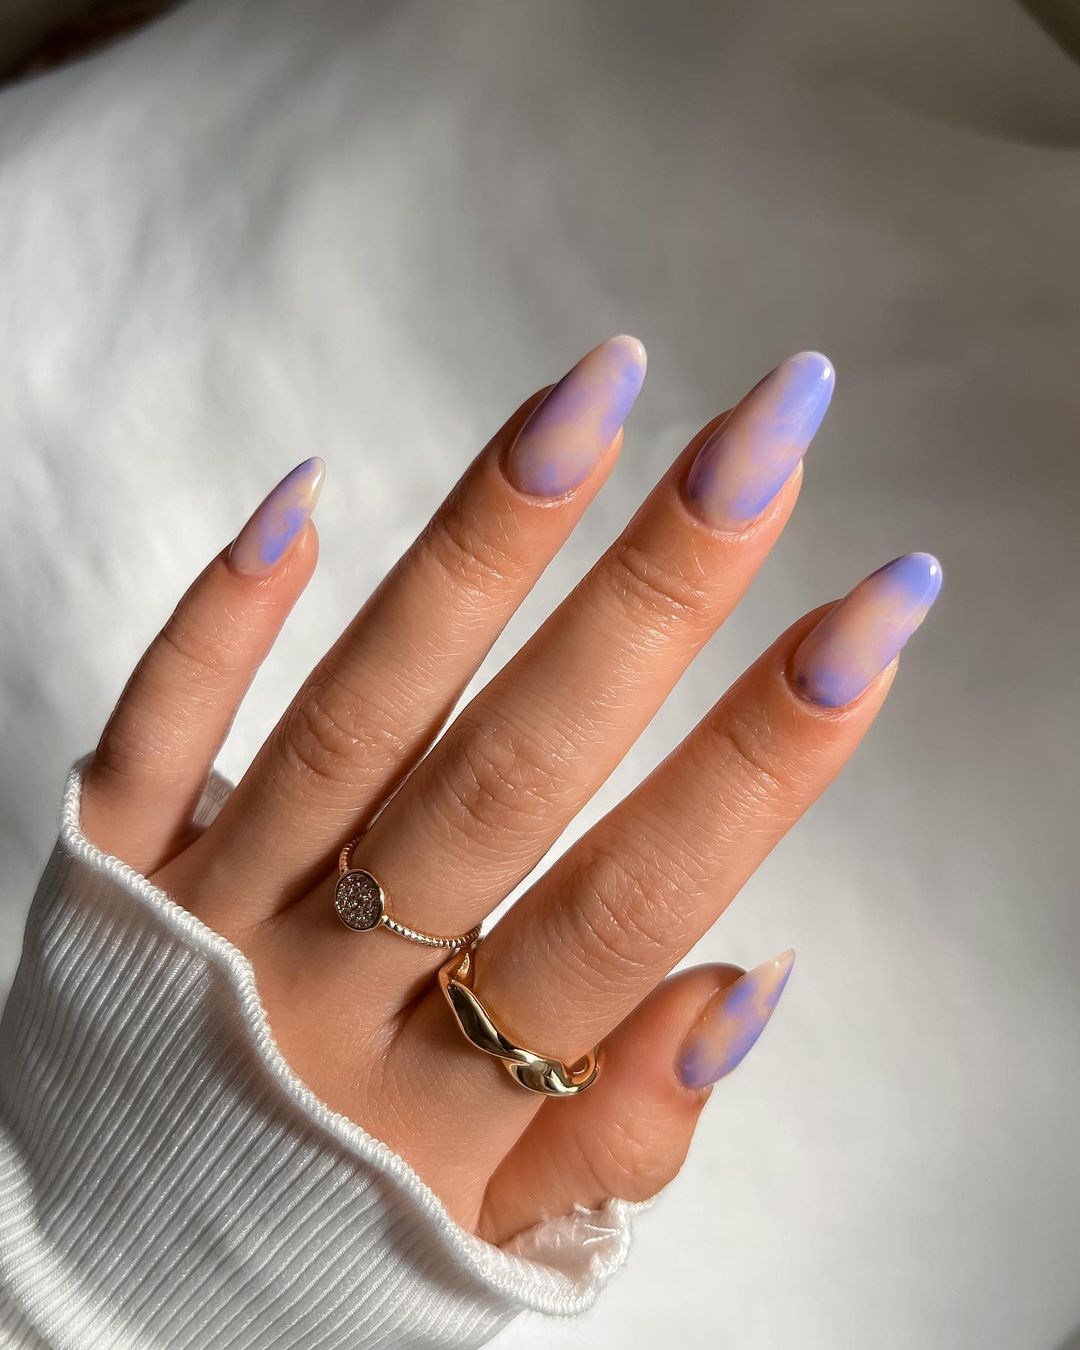 30 Easy Nails & Nail Art Designs To Try In 2022 images 19